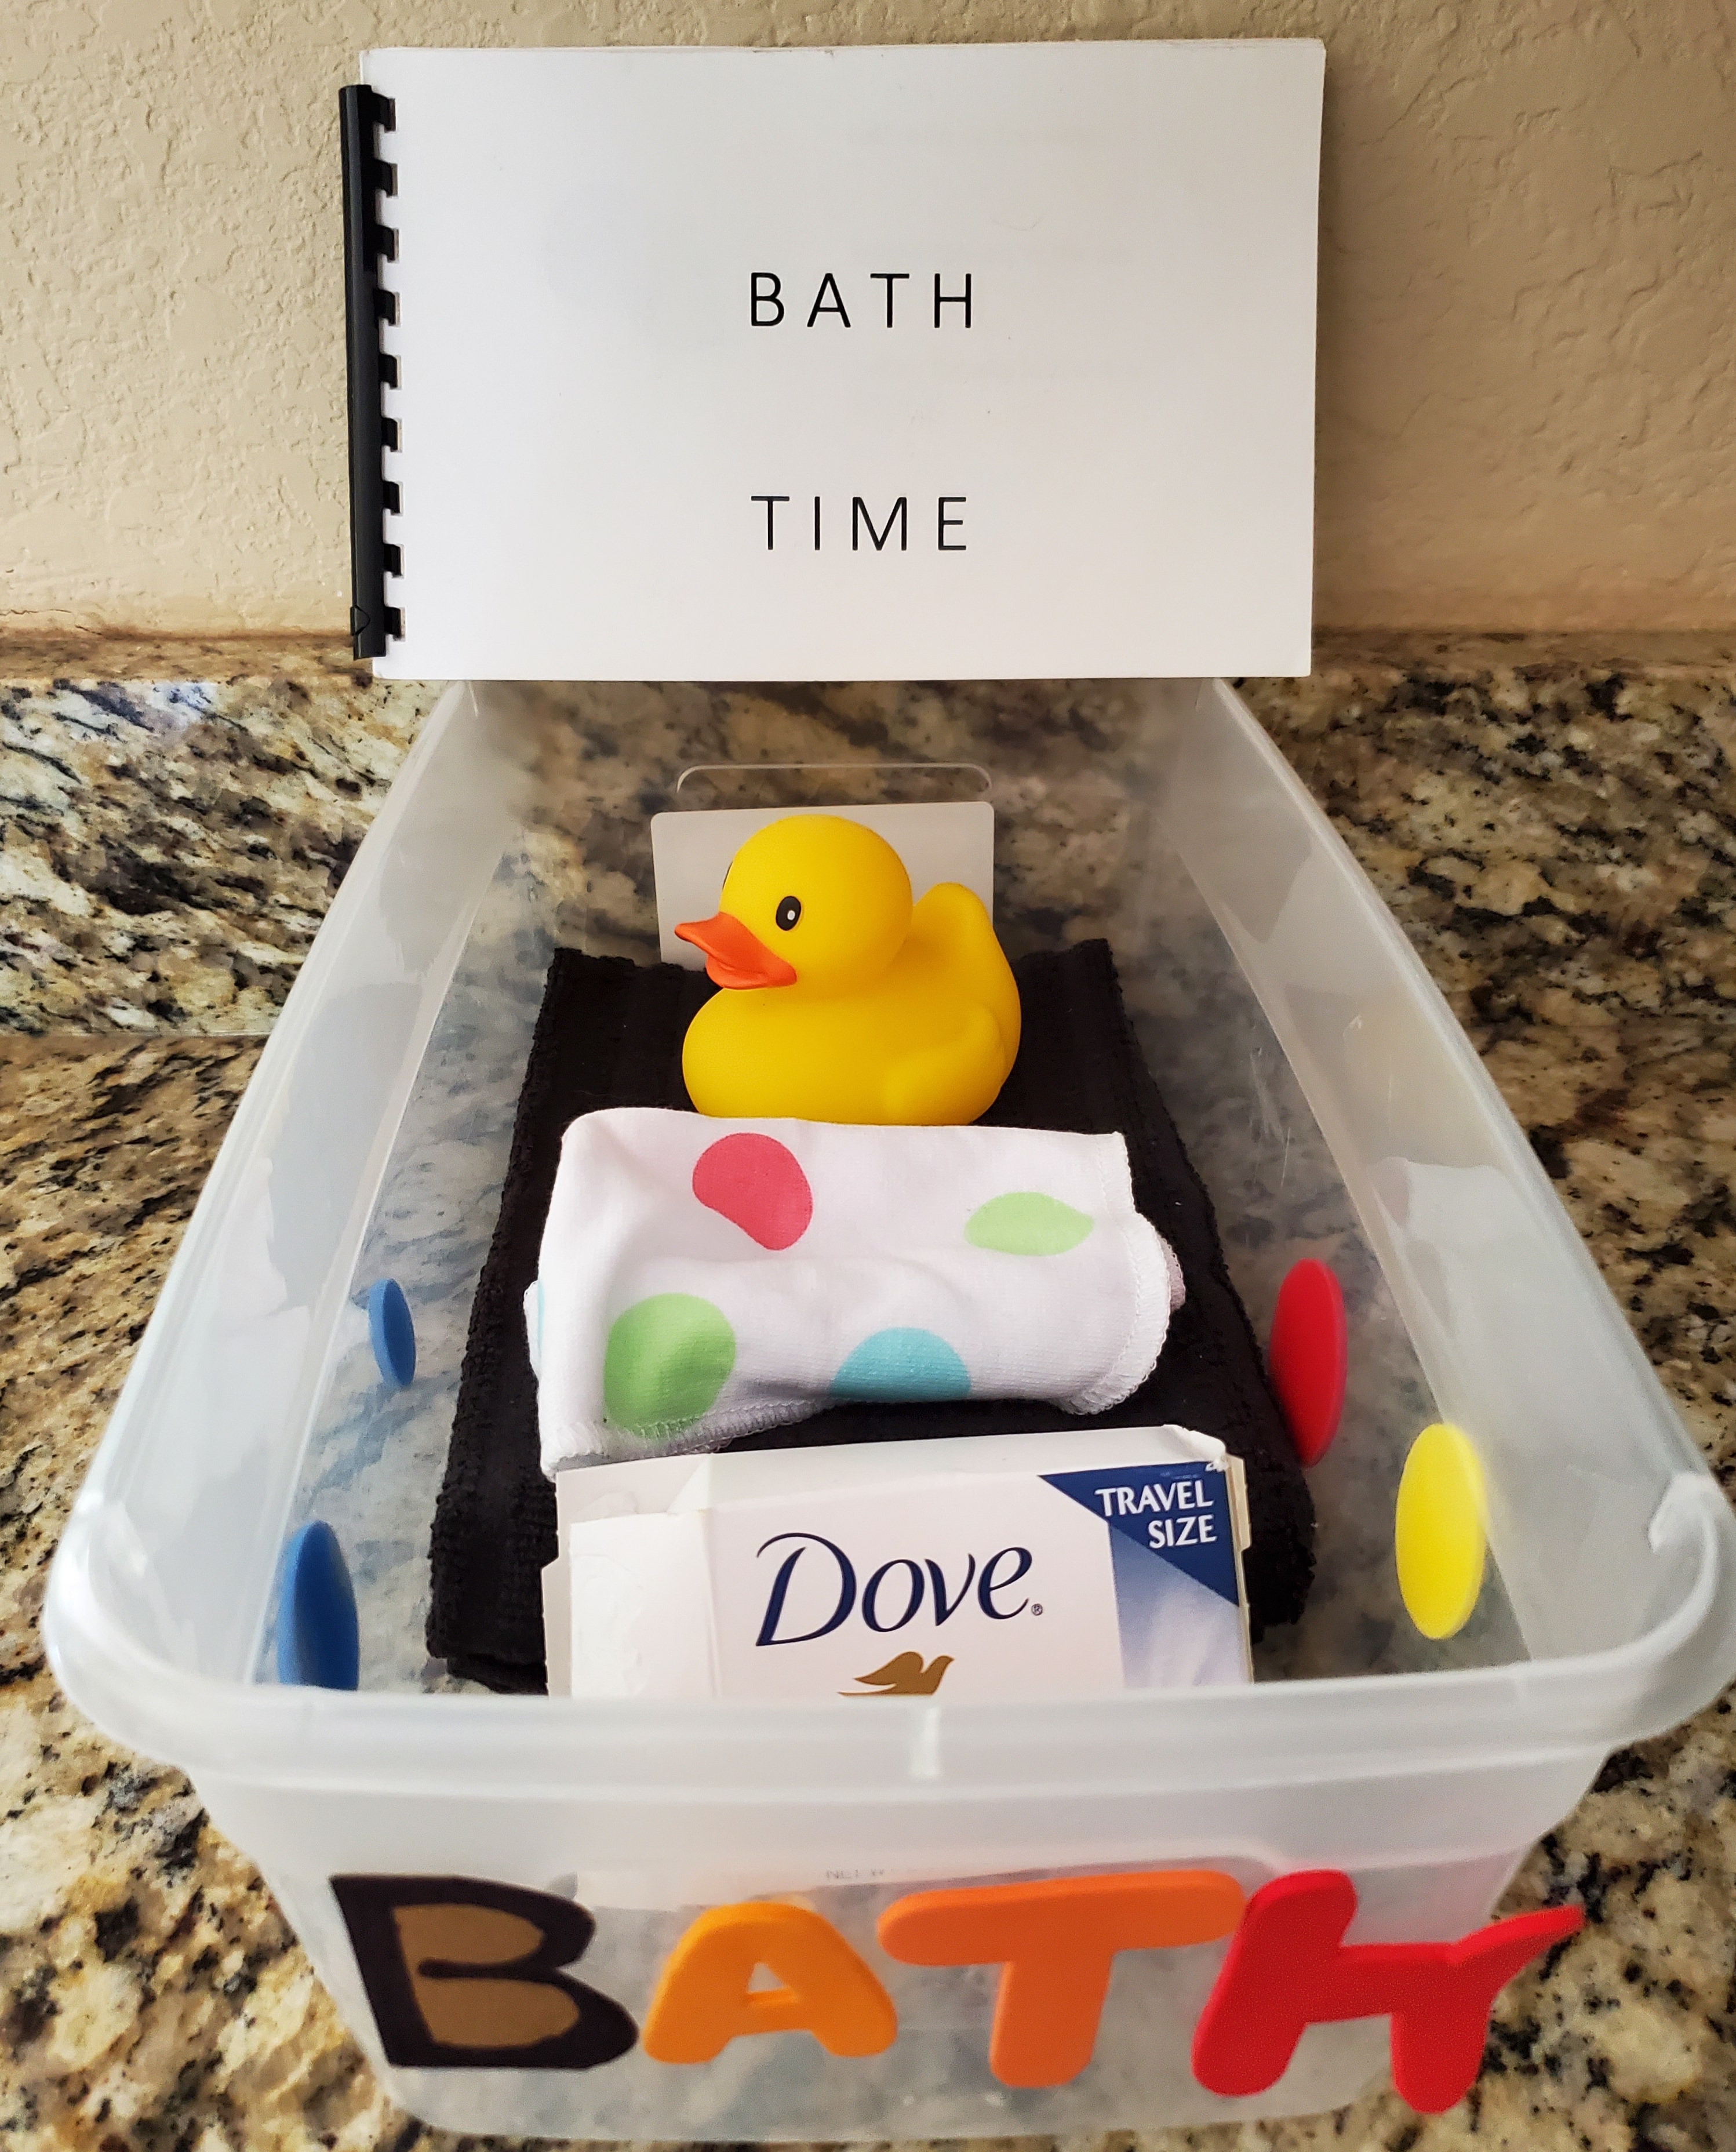 Bath Time story with objects